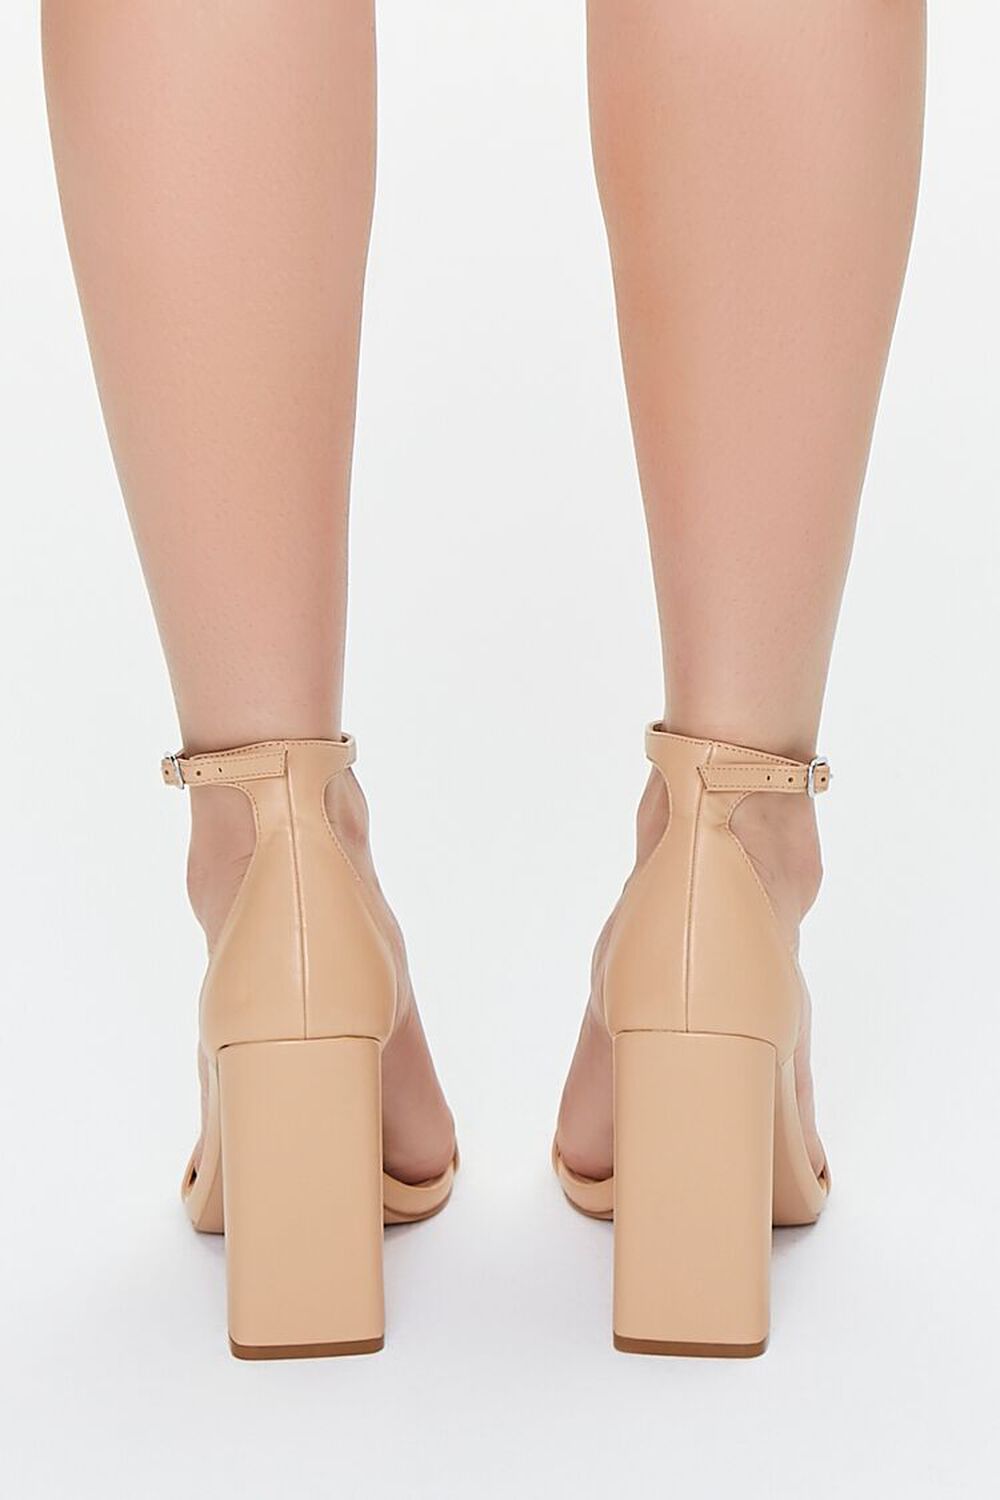 NUDE Faux Leather Buckled Heels, image 3